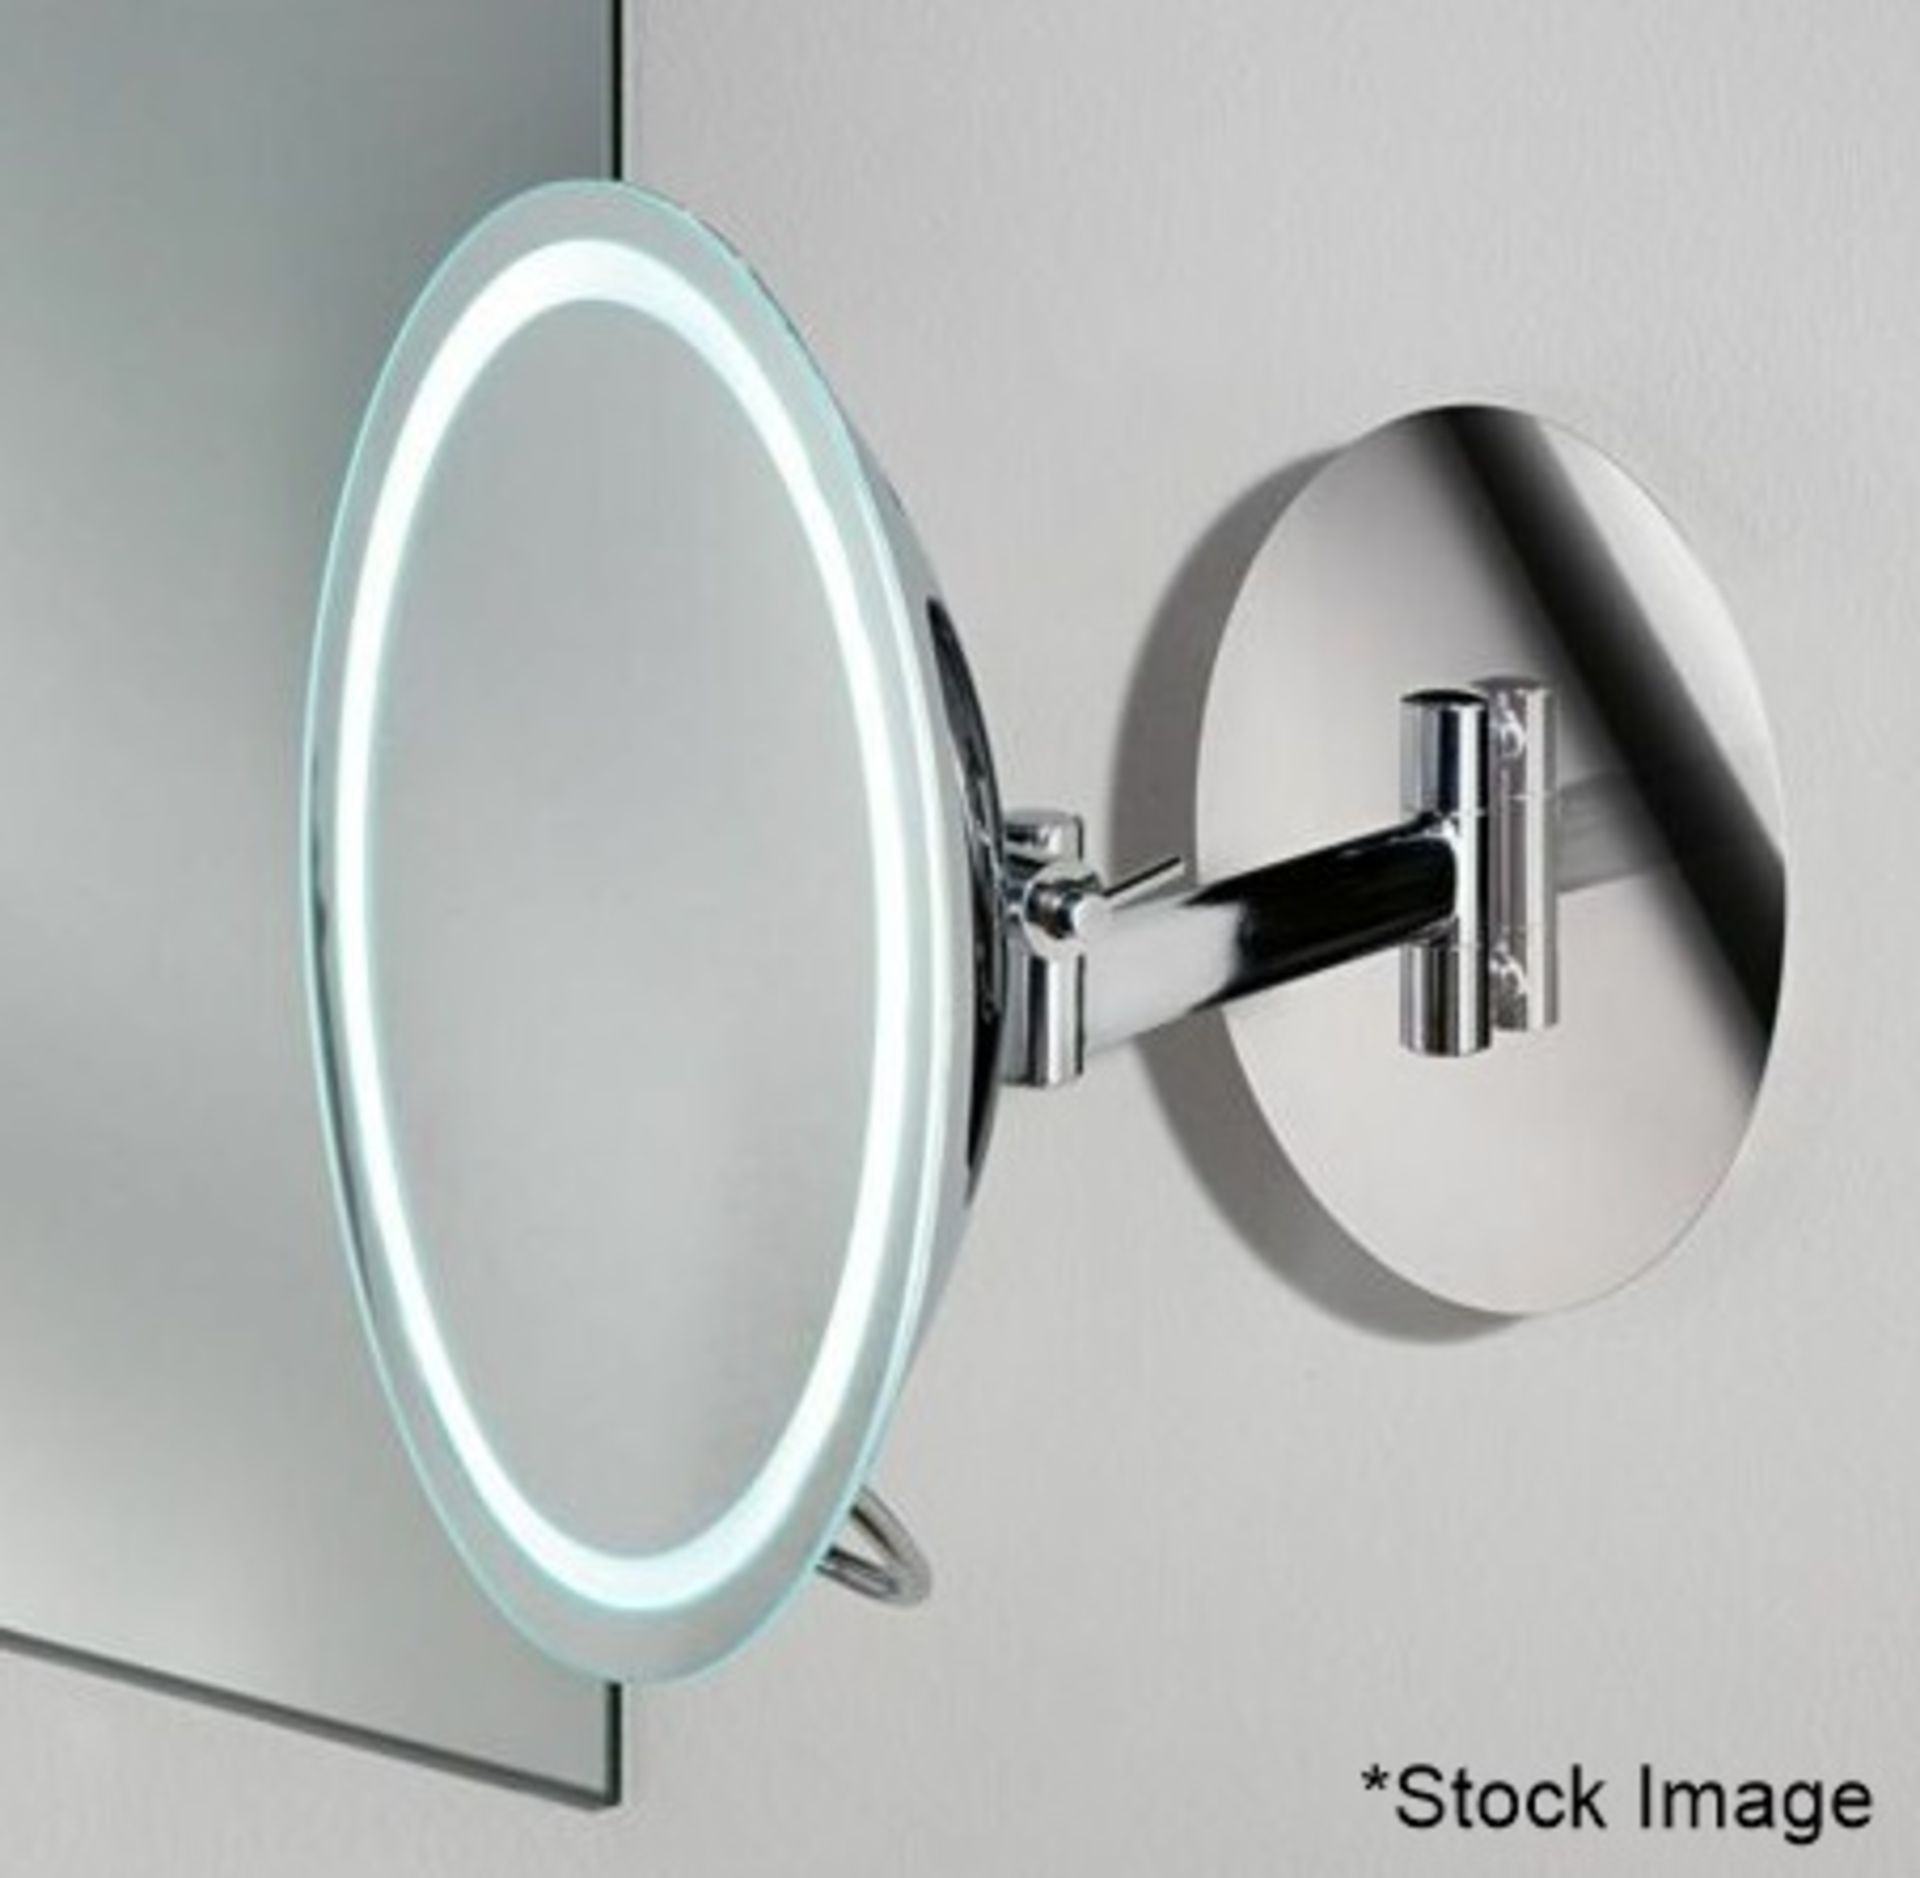 1 x CHELSOM Oval LED Light Up Magnifying Bathroom Chrome Adjustable Wall Mirror - Wired In